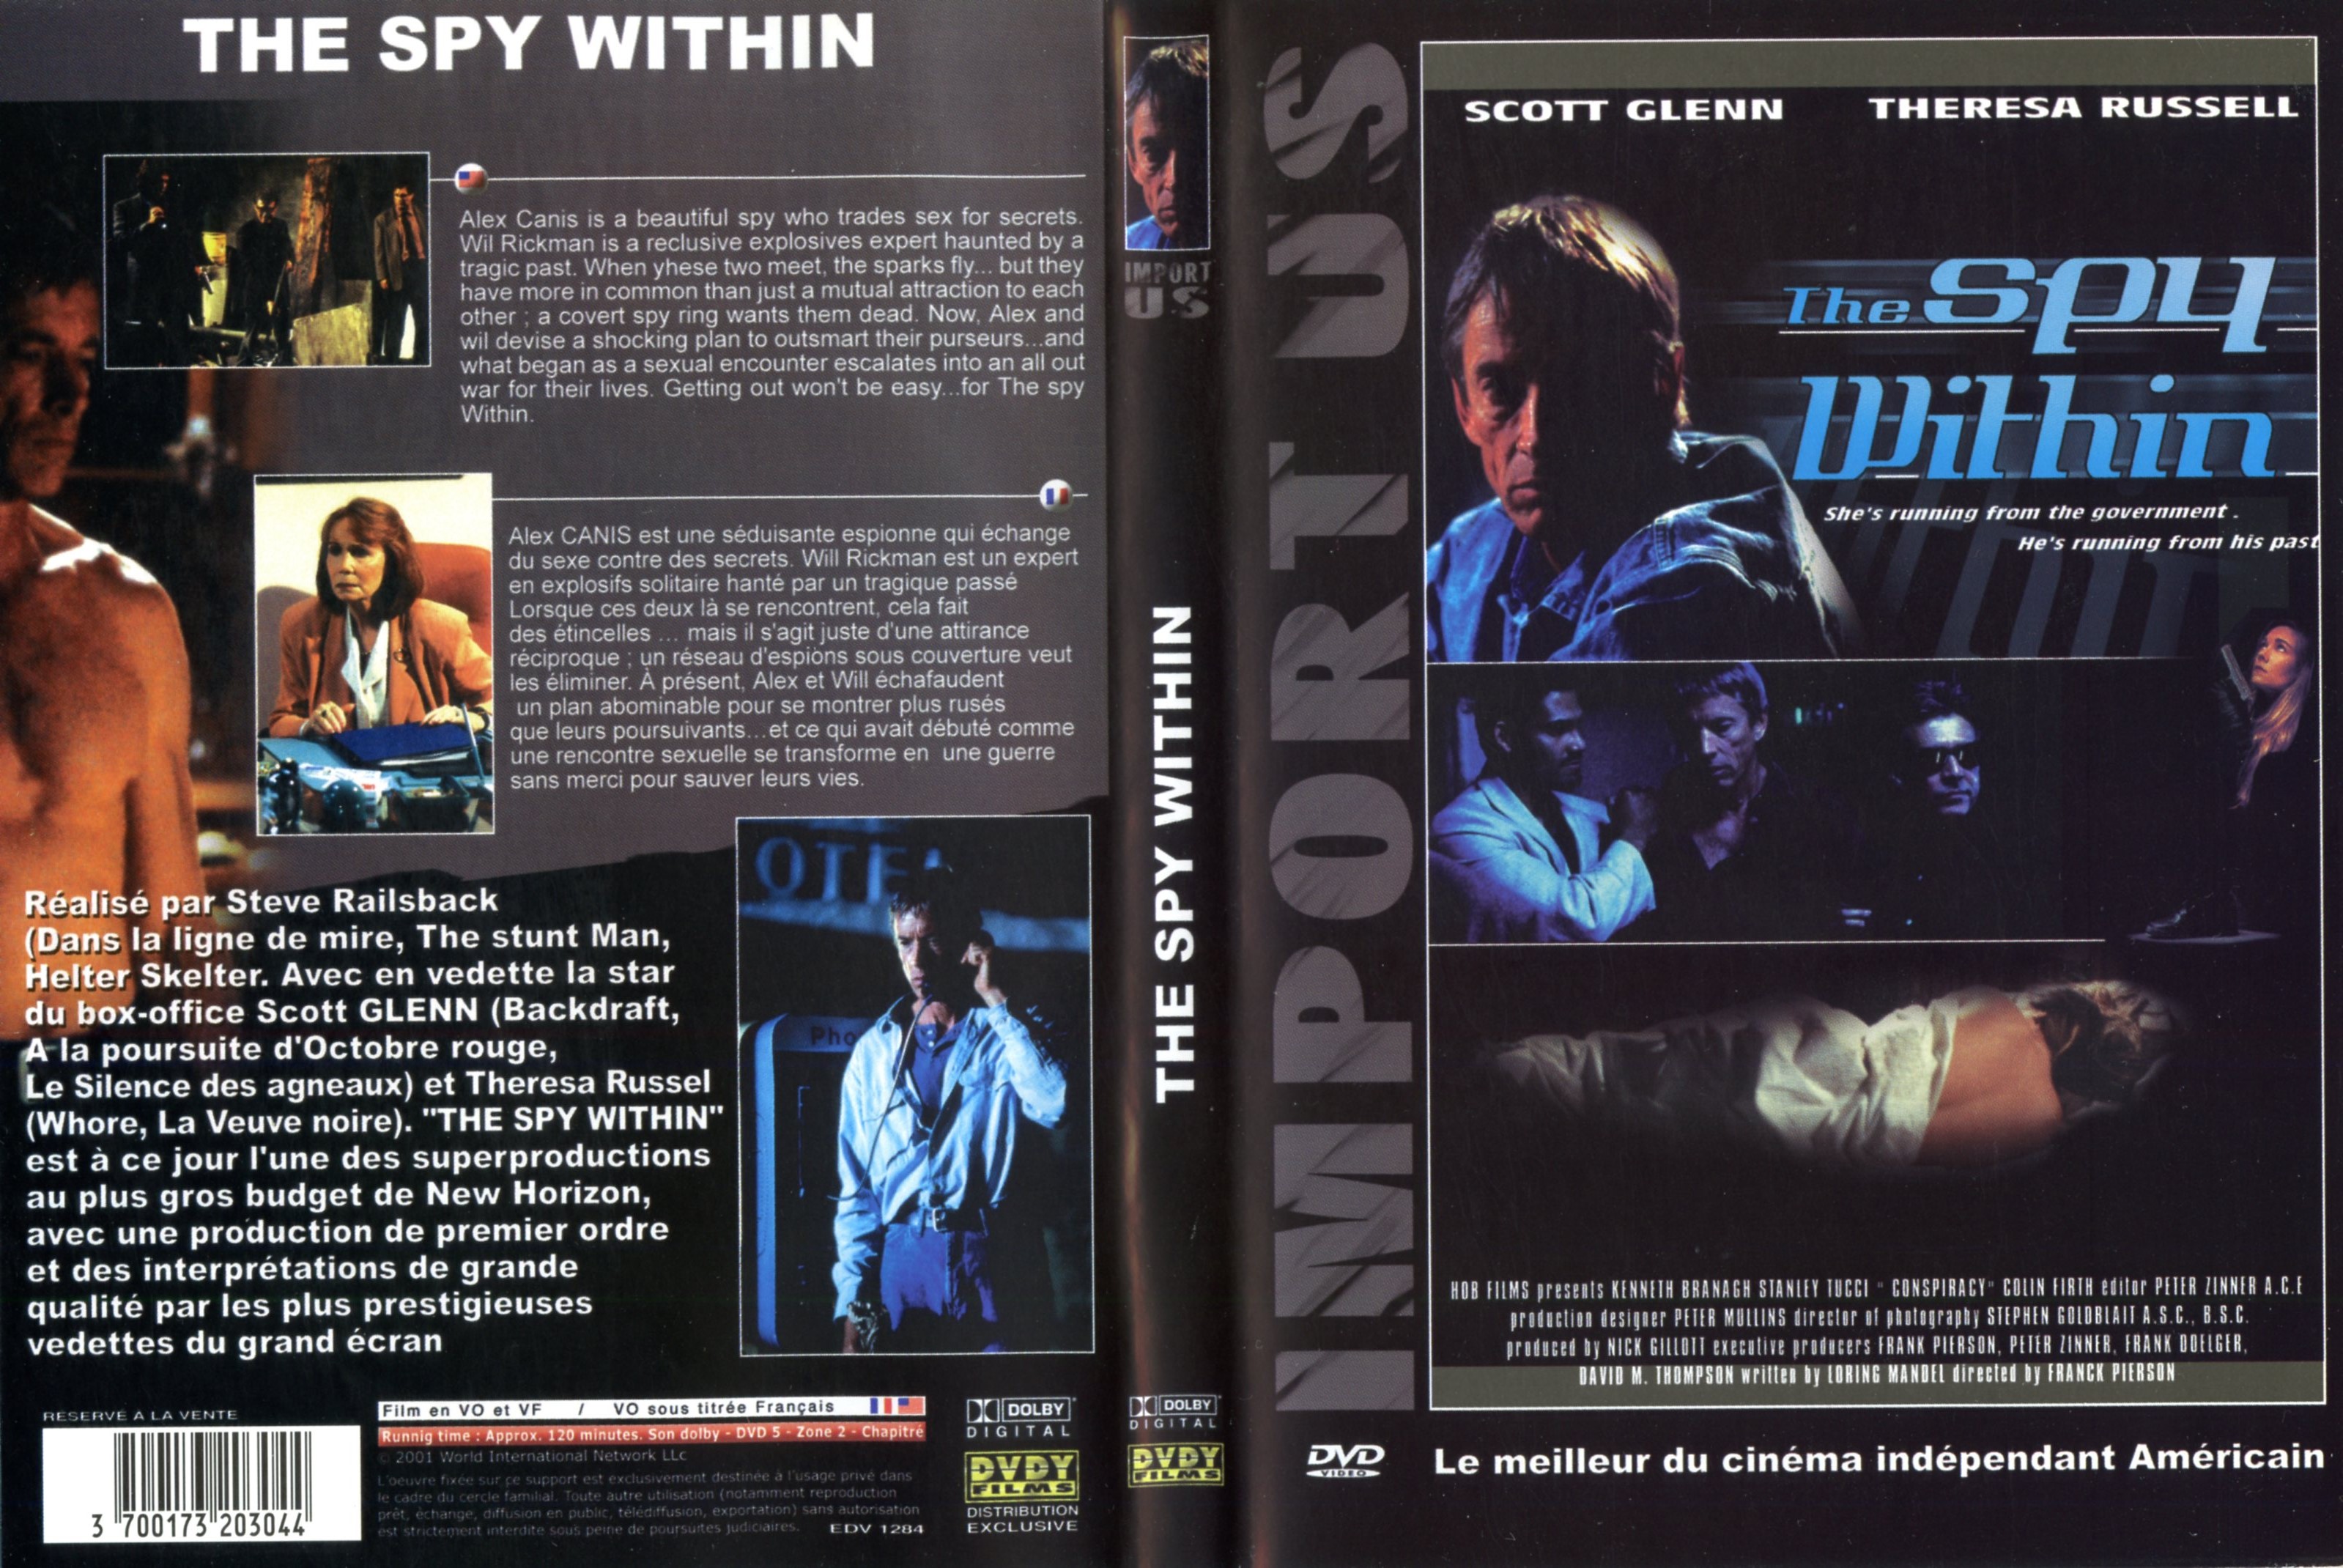 Jaquette DVD The spy within v2